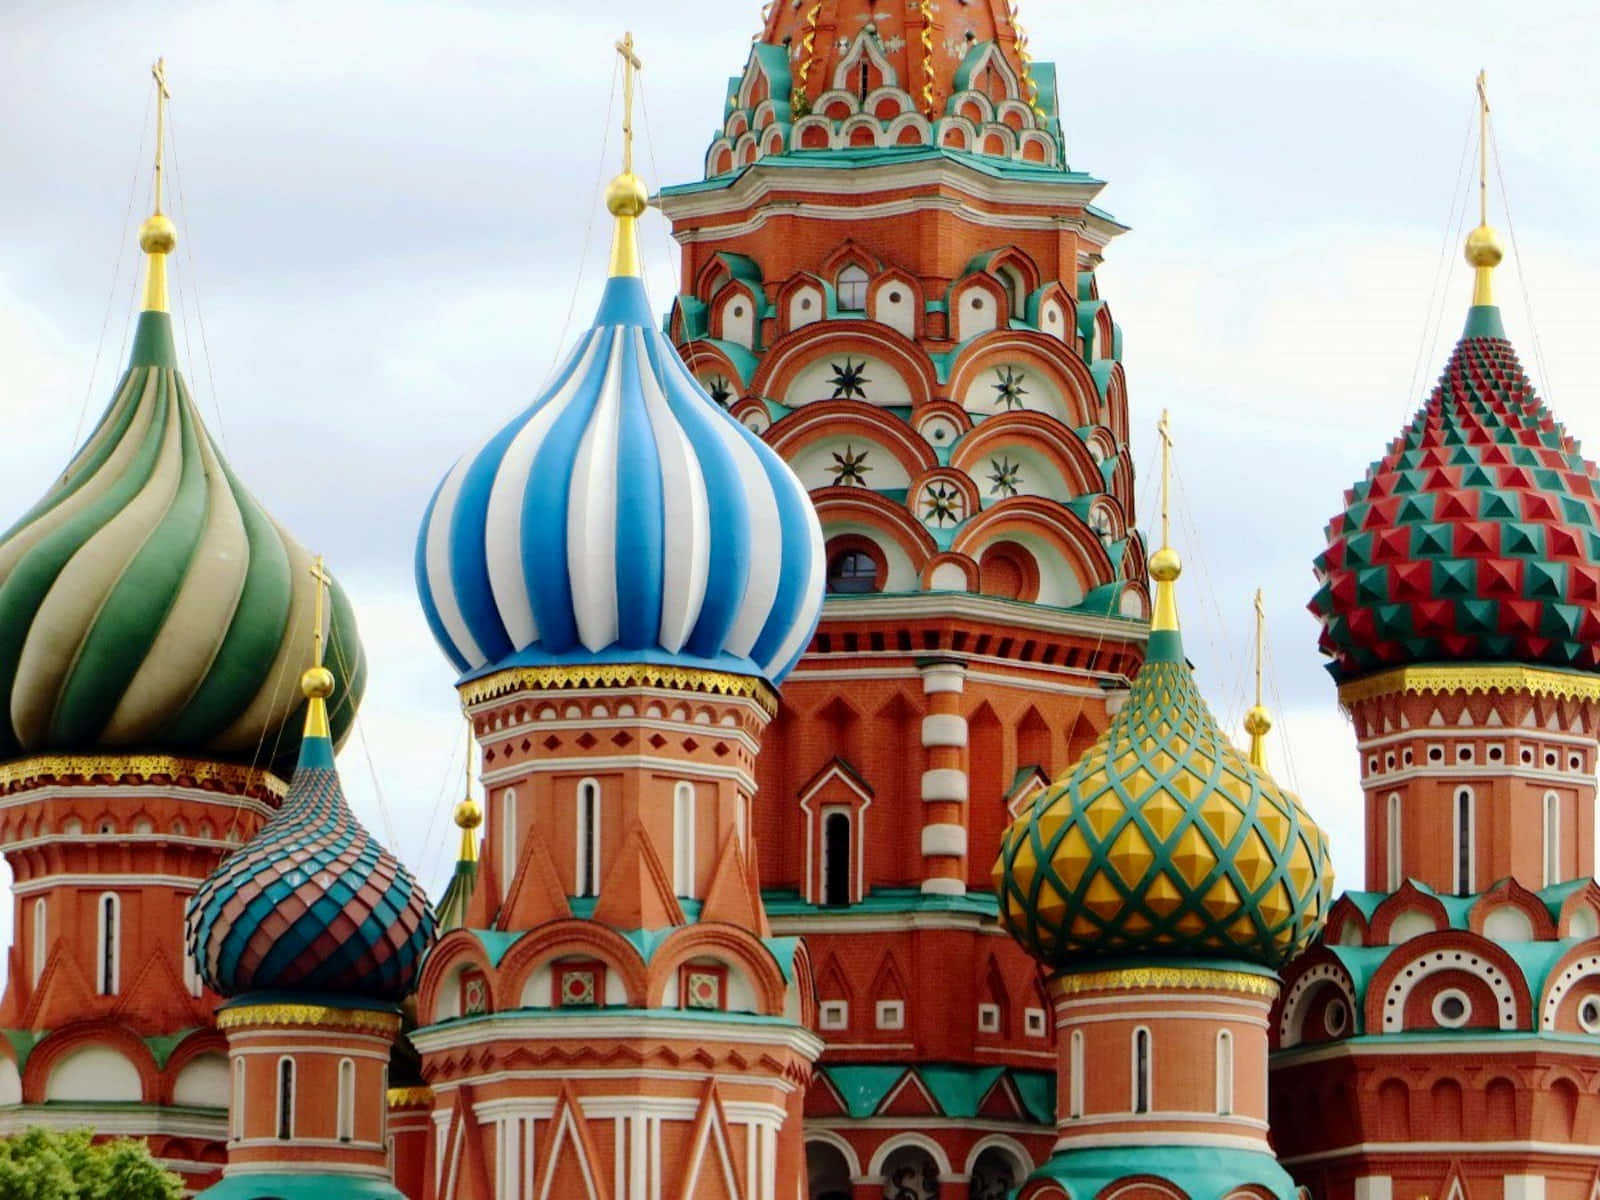 Saint Basil's Cathedral Steeples With Festive Colors And Shapes Wallpaper